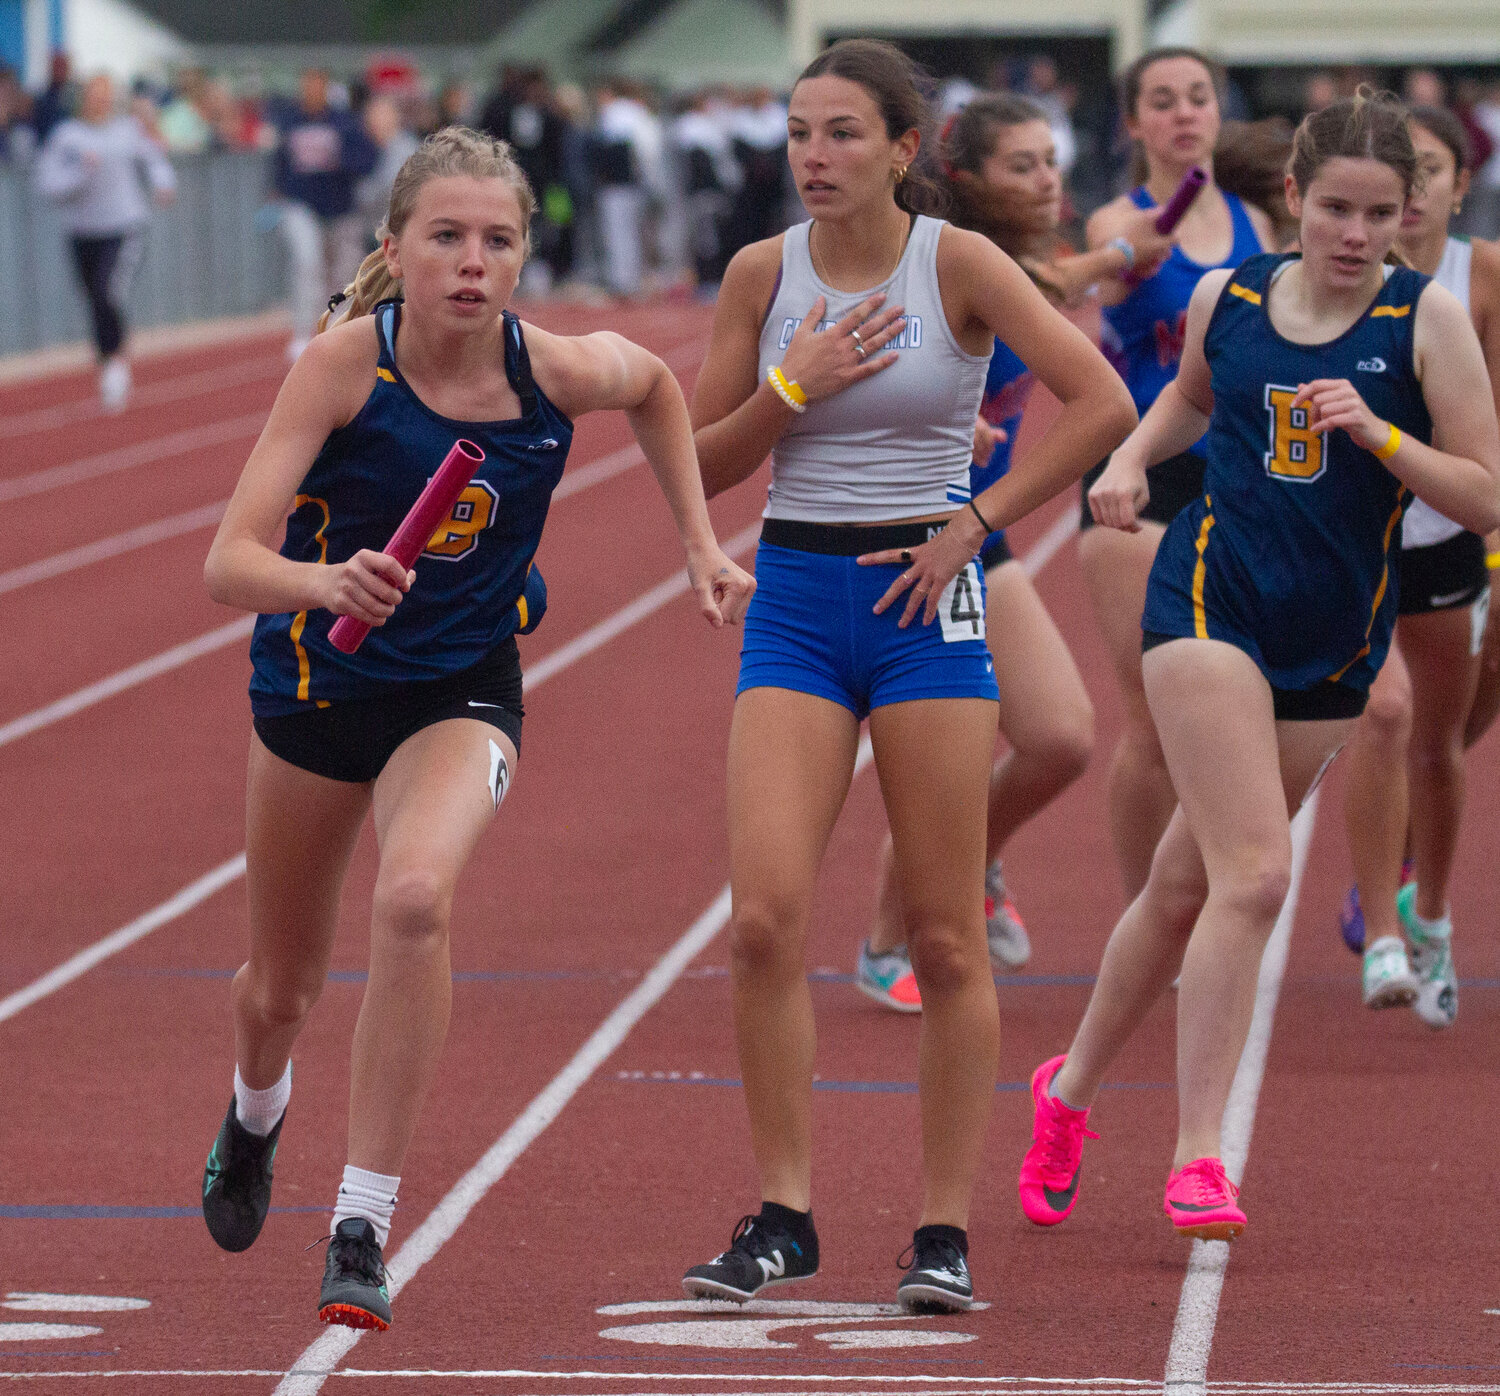 Barrington's Faith VanNess (left) runs a leg of the 4x400-meter relay race at the state track championship.